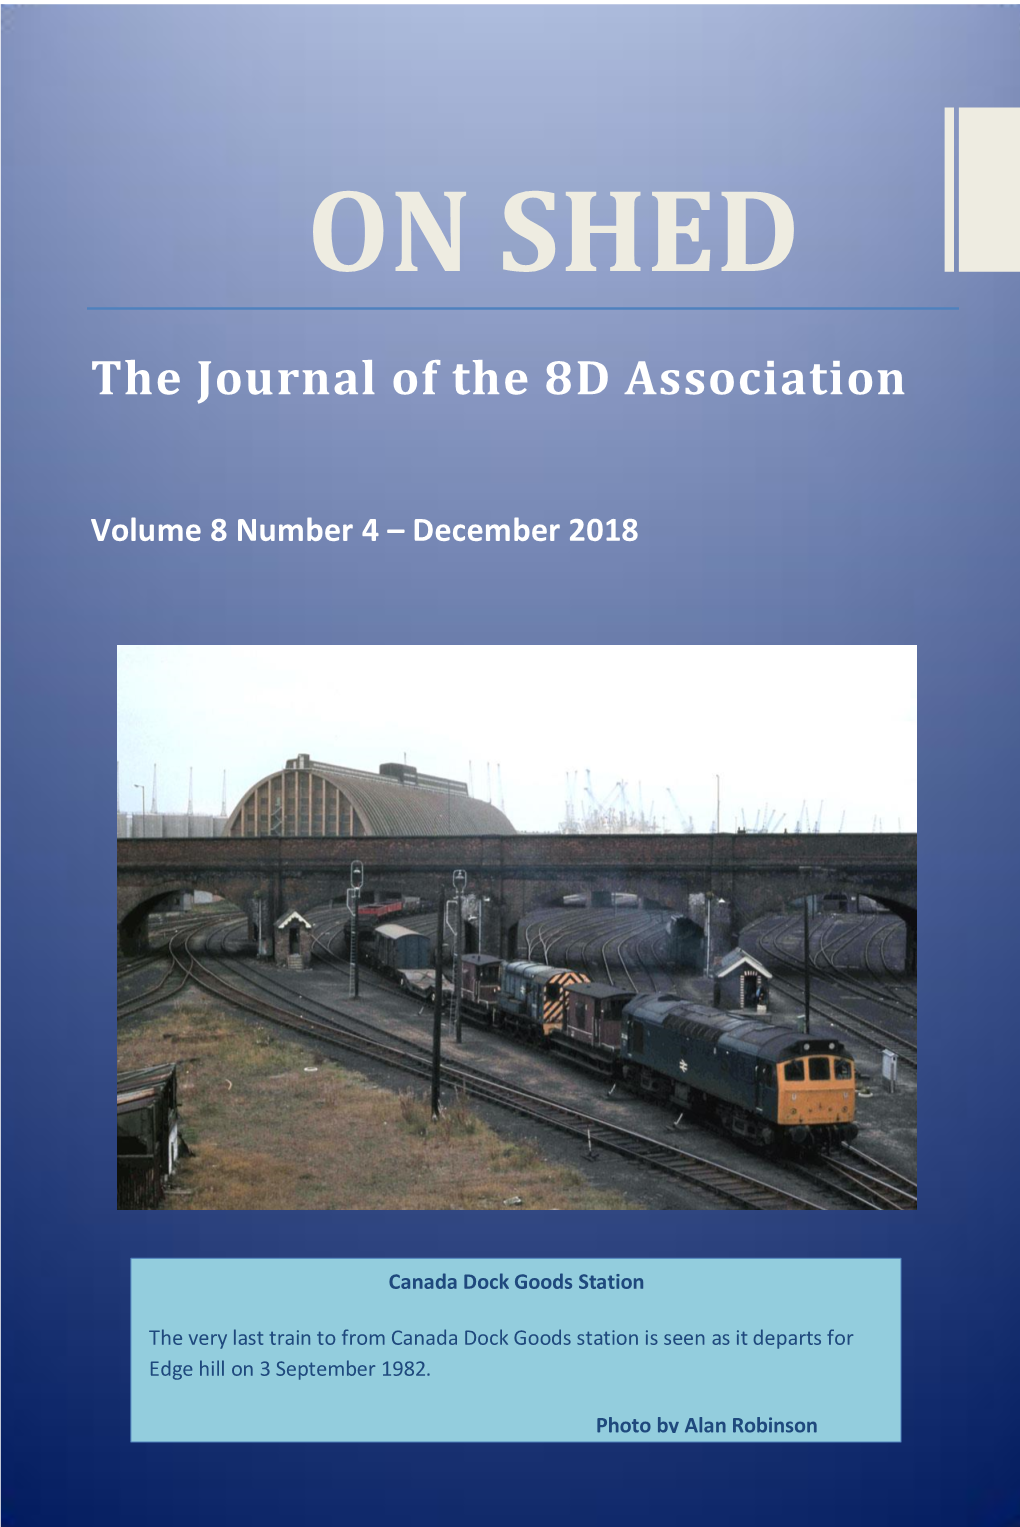 The Journal of the 8D Association